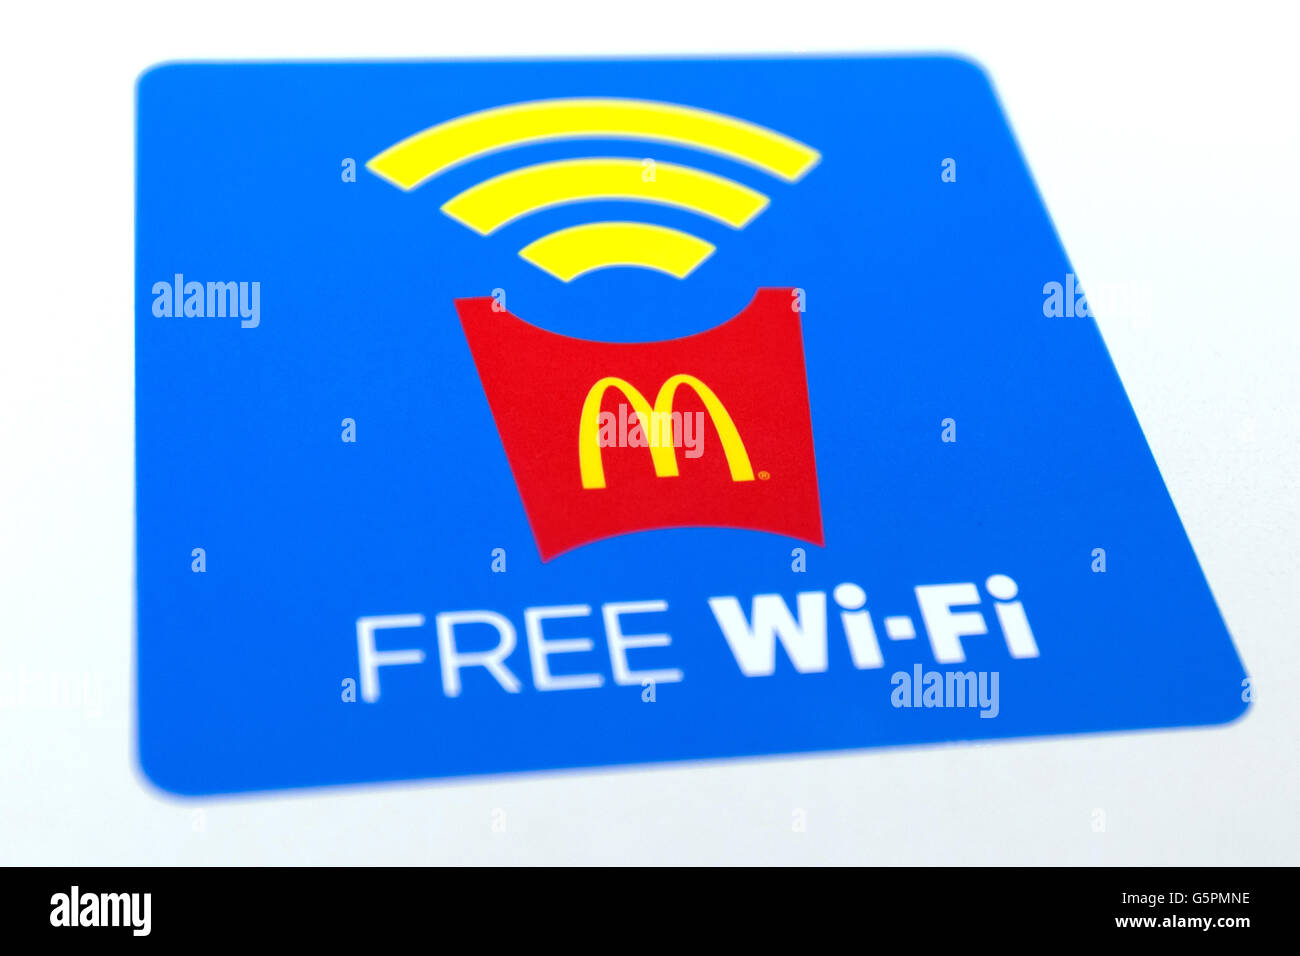 Free wi-fi access promoted inside McDonald's Azabujuban branch on June 23, 2016, Tokyo, Japan. McDonald's Japan launched the service on June 20th and announced that it will provide free wi-fi in some 1,500 branches across Japan by the end of July. © Rodrigo Reyes Marin/AFLO/Alamy Live News Stock Photo